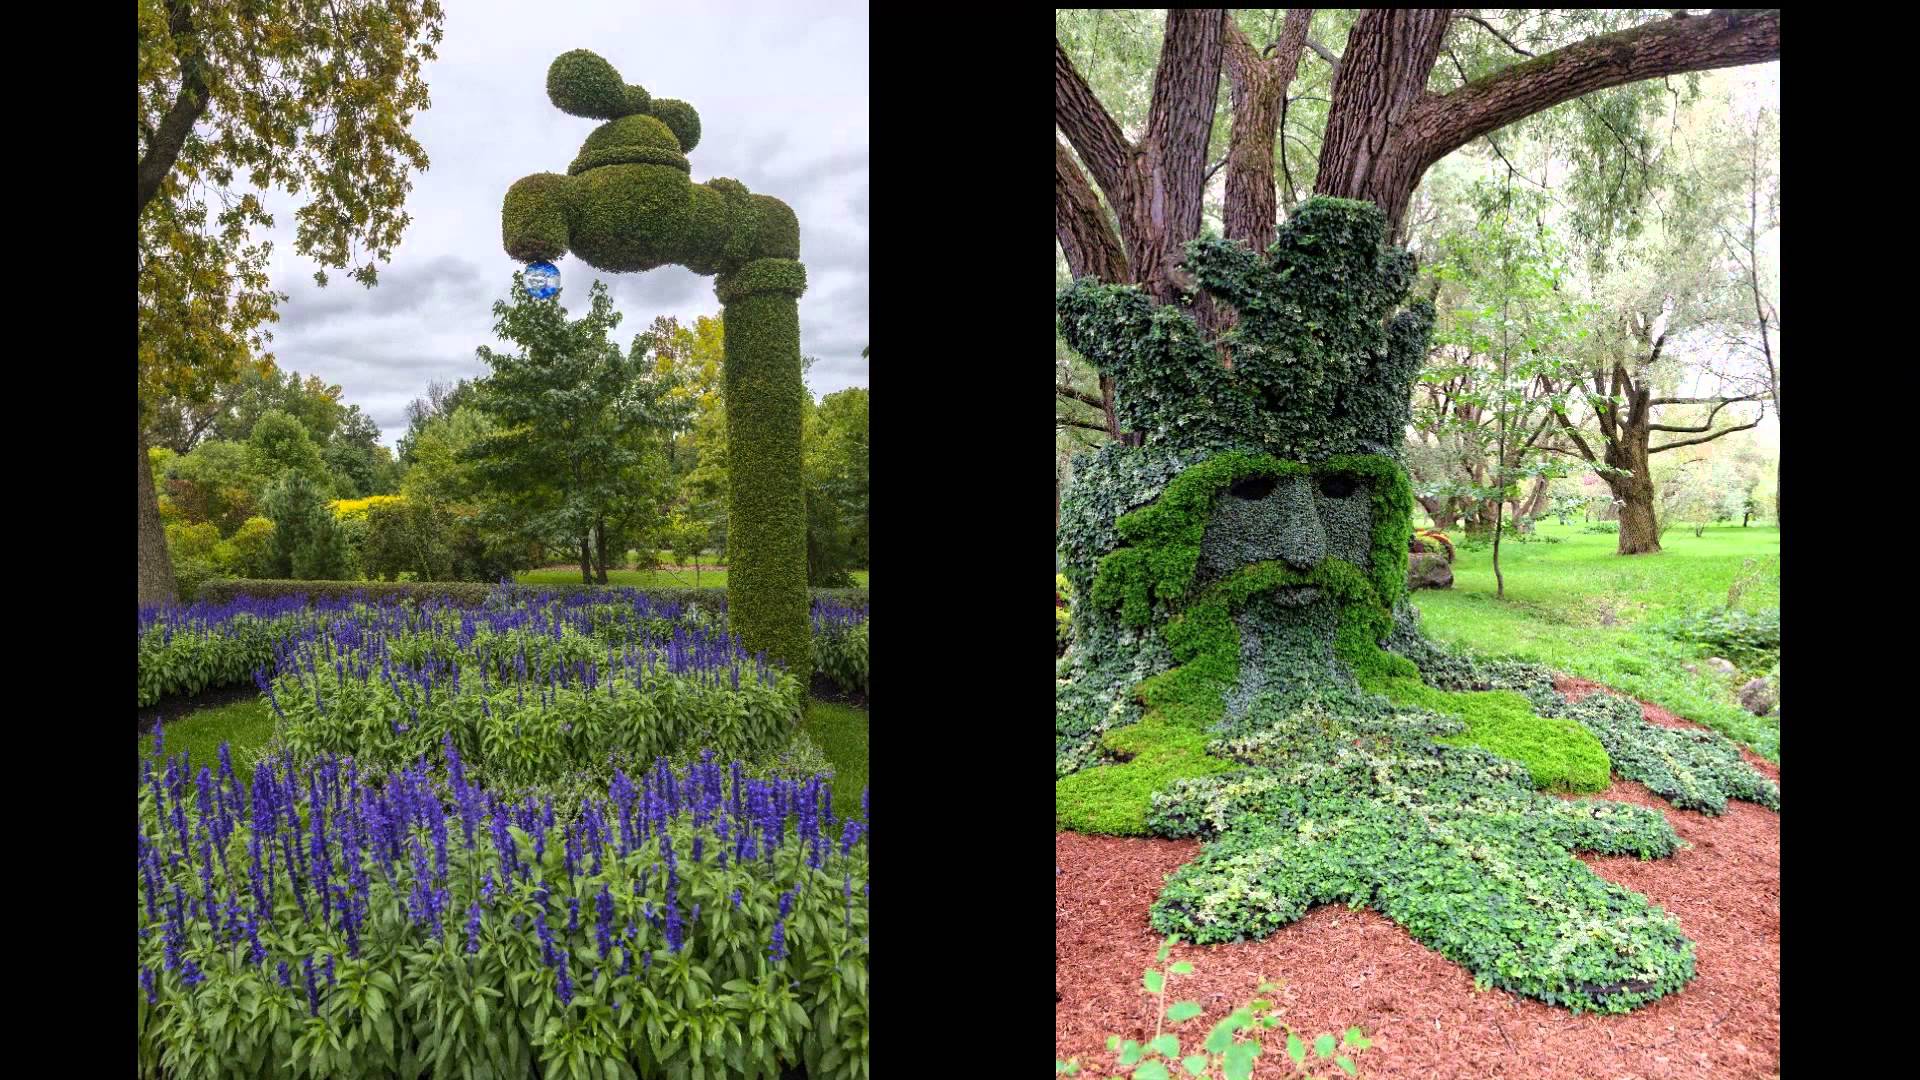 Plant Art - Images of Plant Sculptures - YouTube